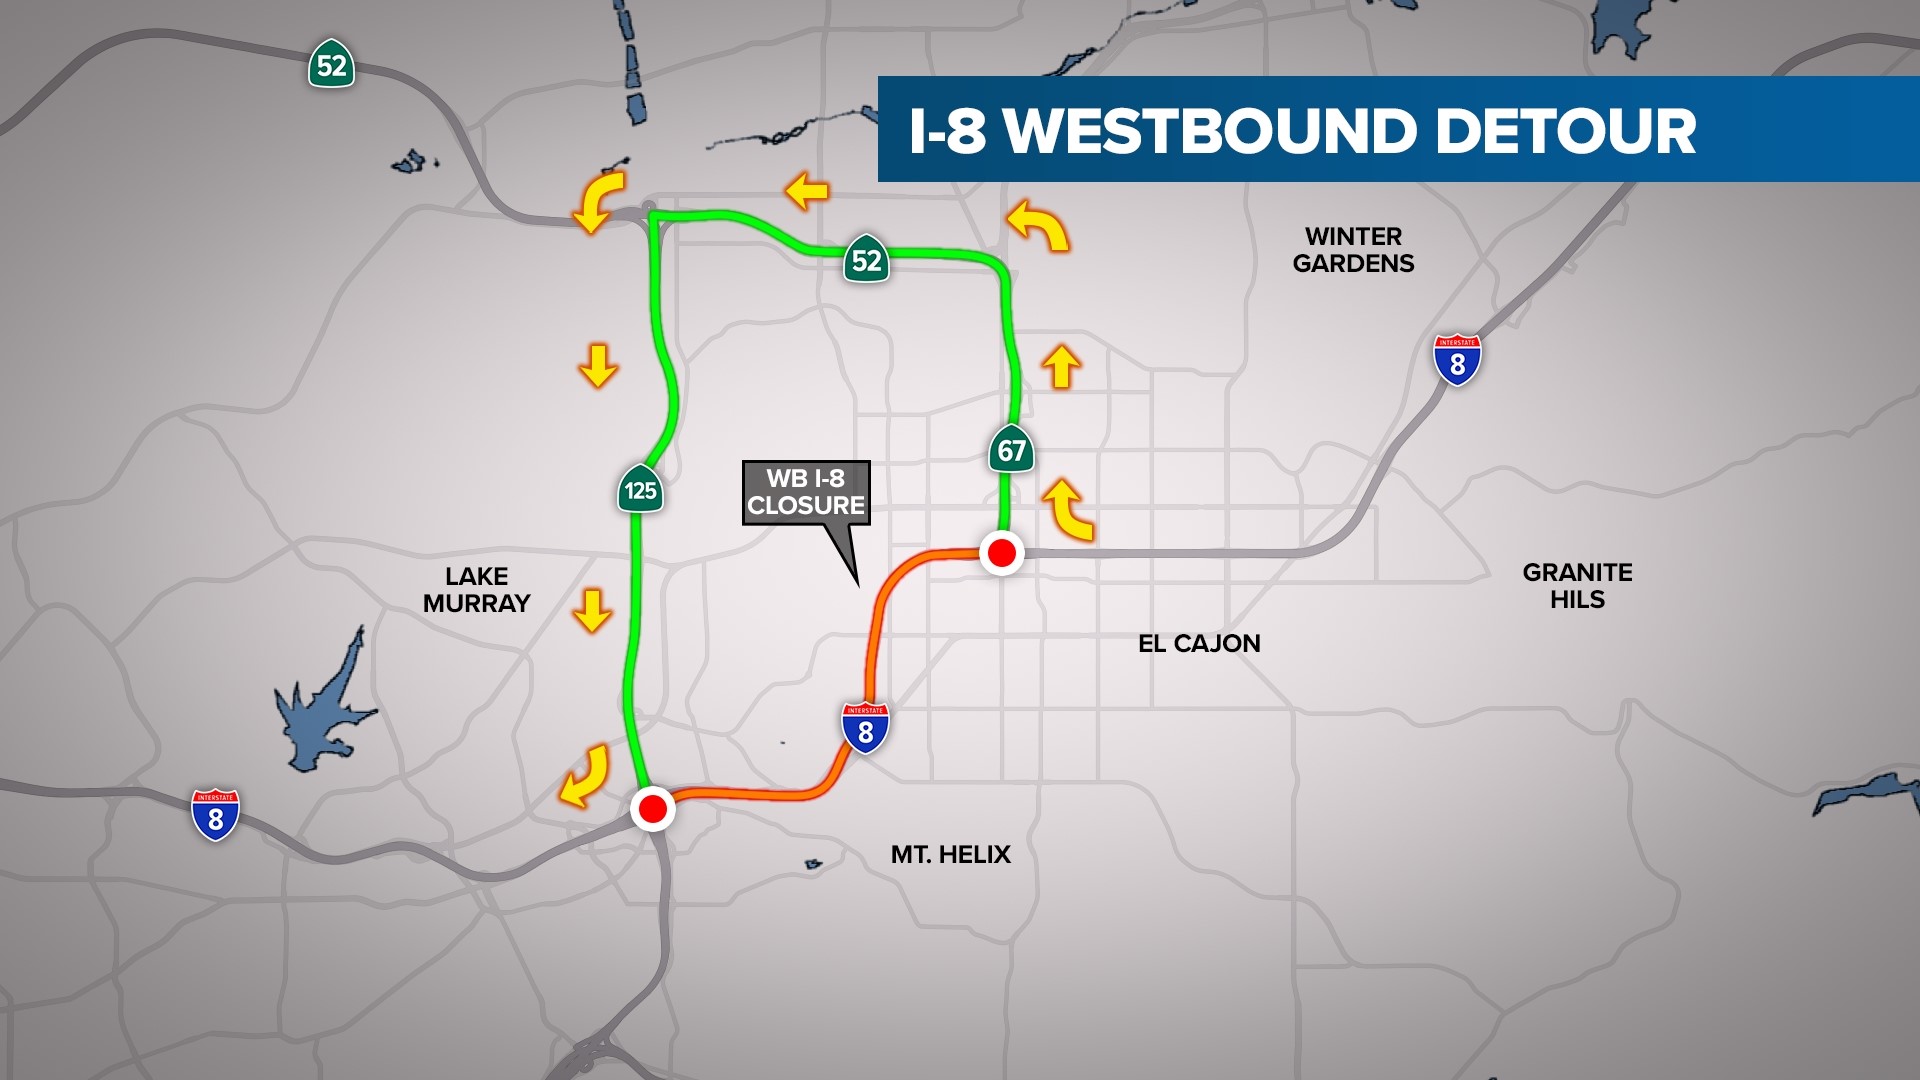 Crews could close up to 3 westbound lanes along Interstate 8 from Friday, Jan. 5 at 9 p.m. through Tuesday, Jan. 9 during construction.